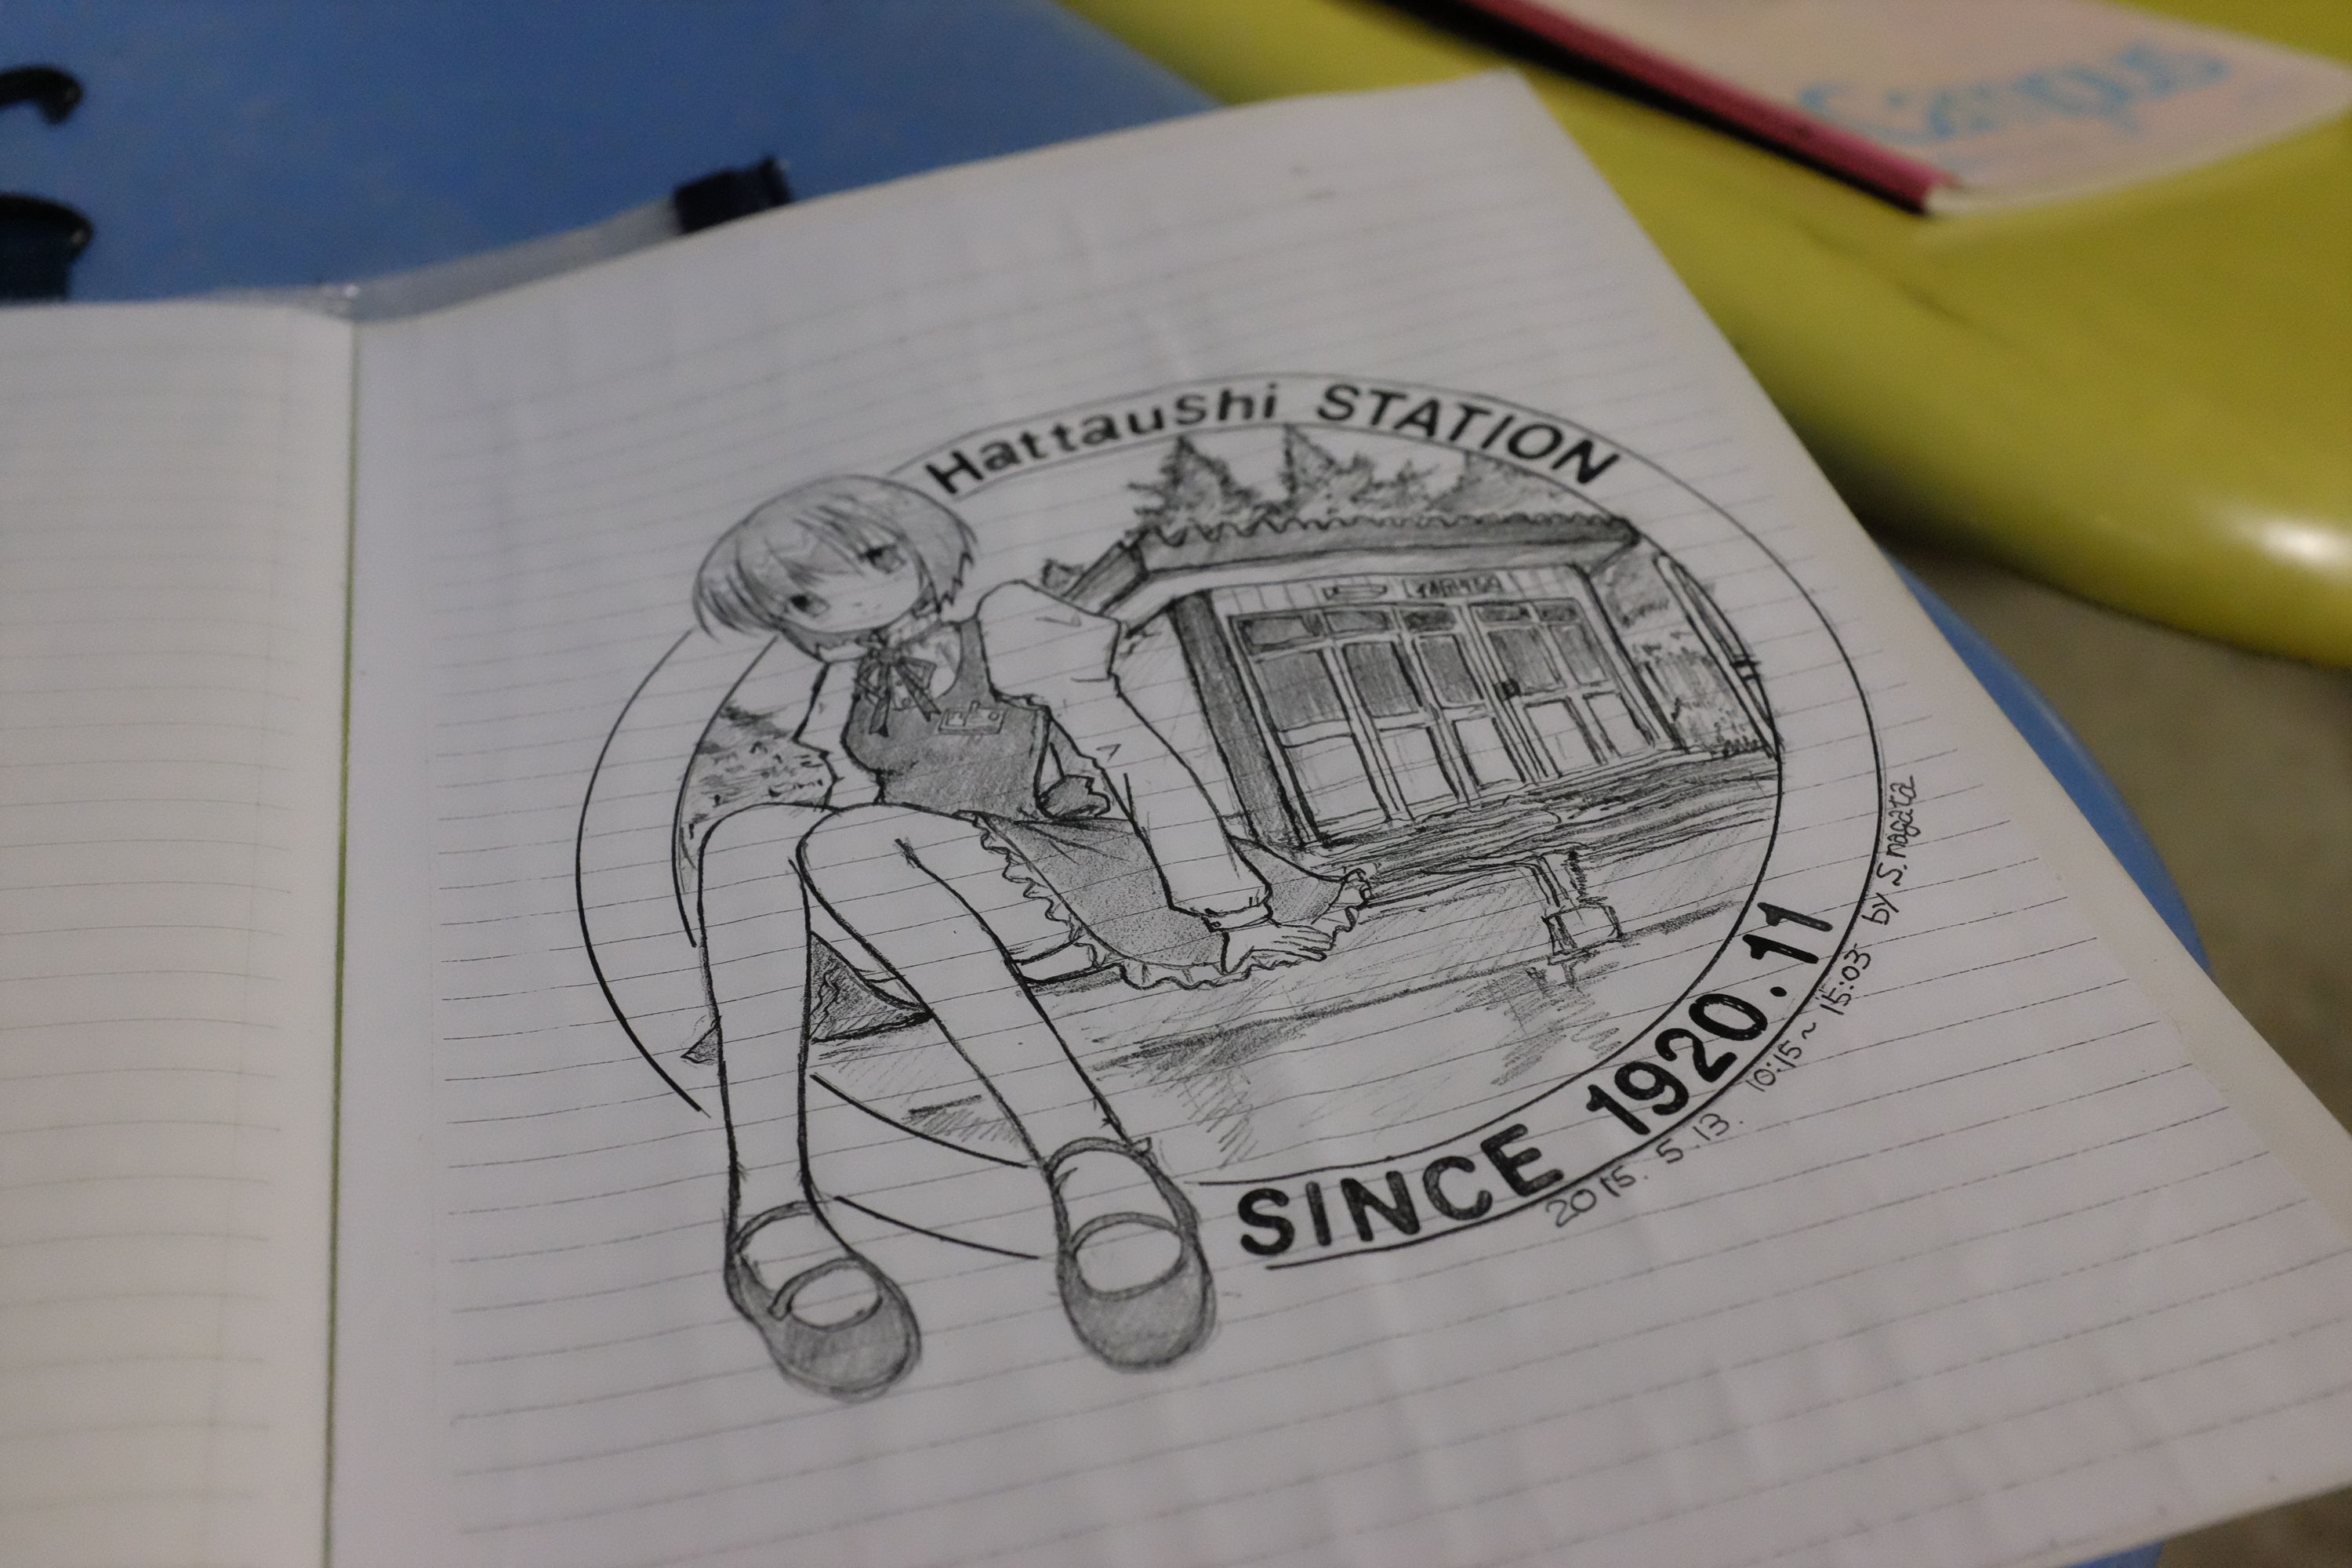 A drawing in the guest book of Hattaushi Station shows a young girl in manga style sitting in front of the station building.